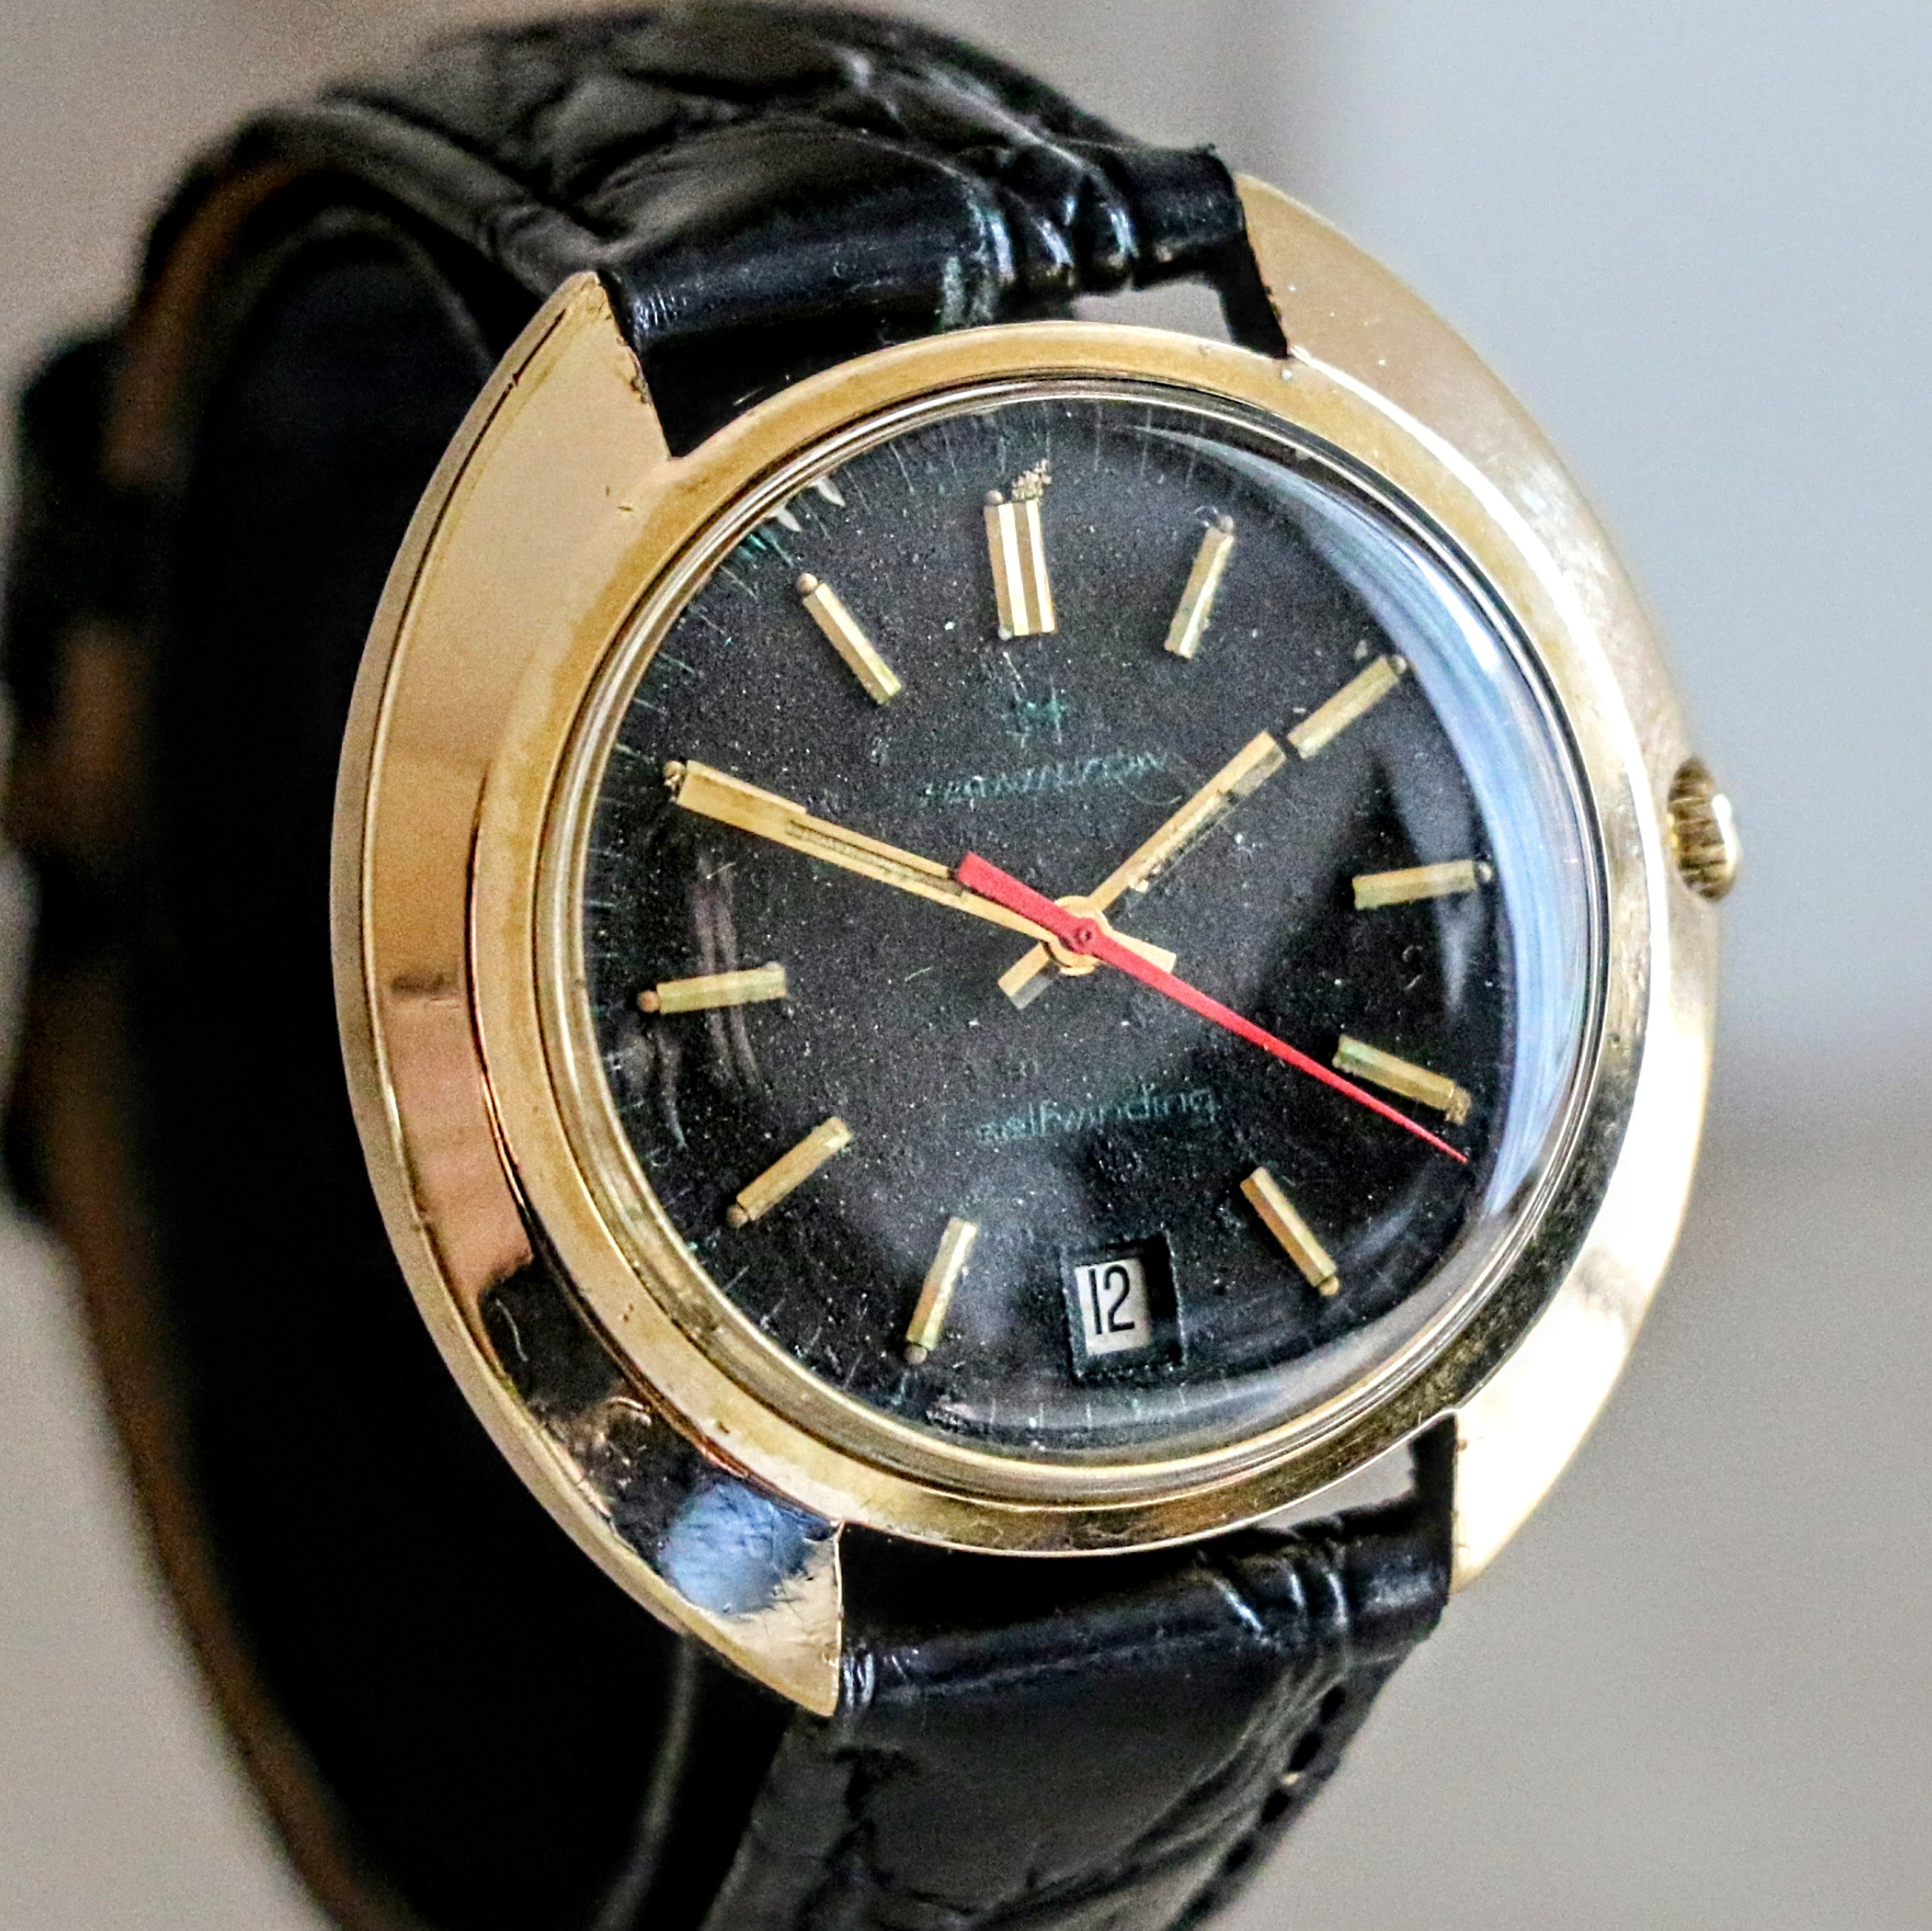 1960s HAMILTON Dateline Automatic Watch - Rare and Collectible Timepiece